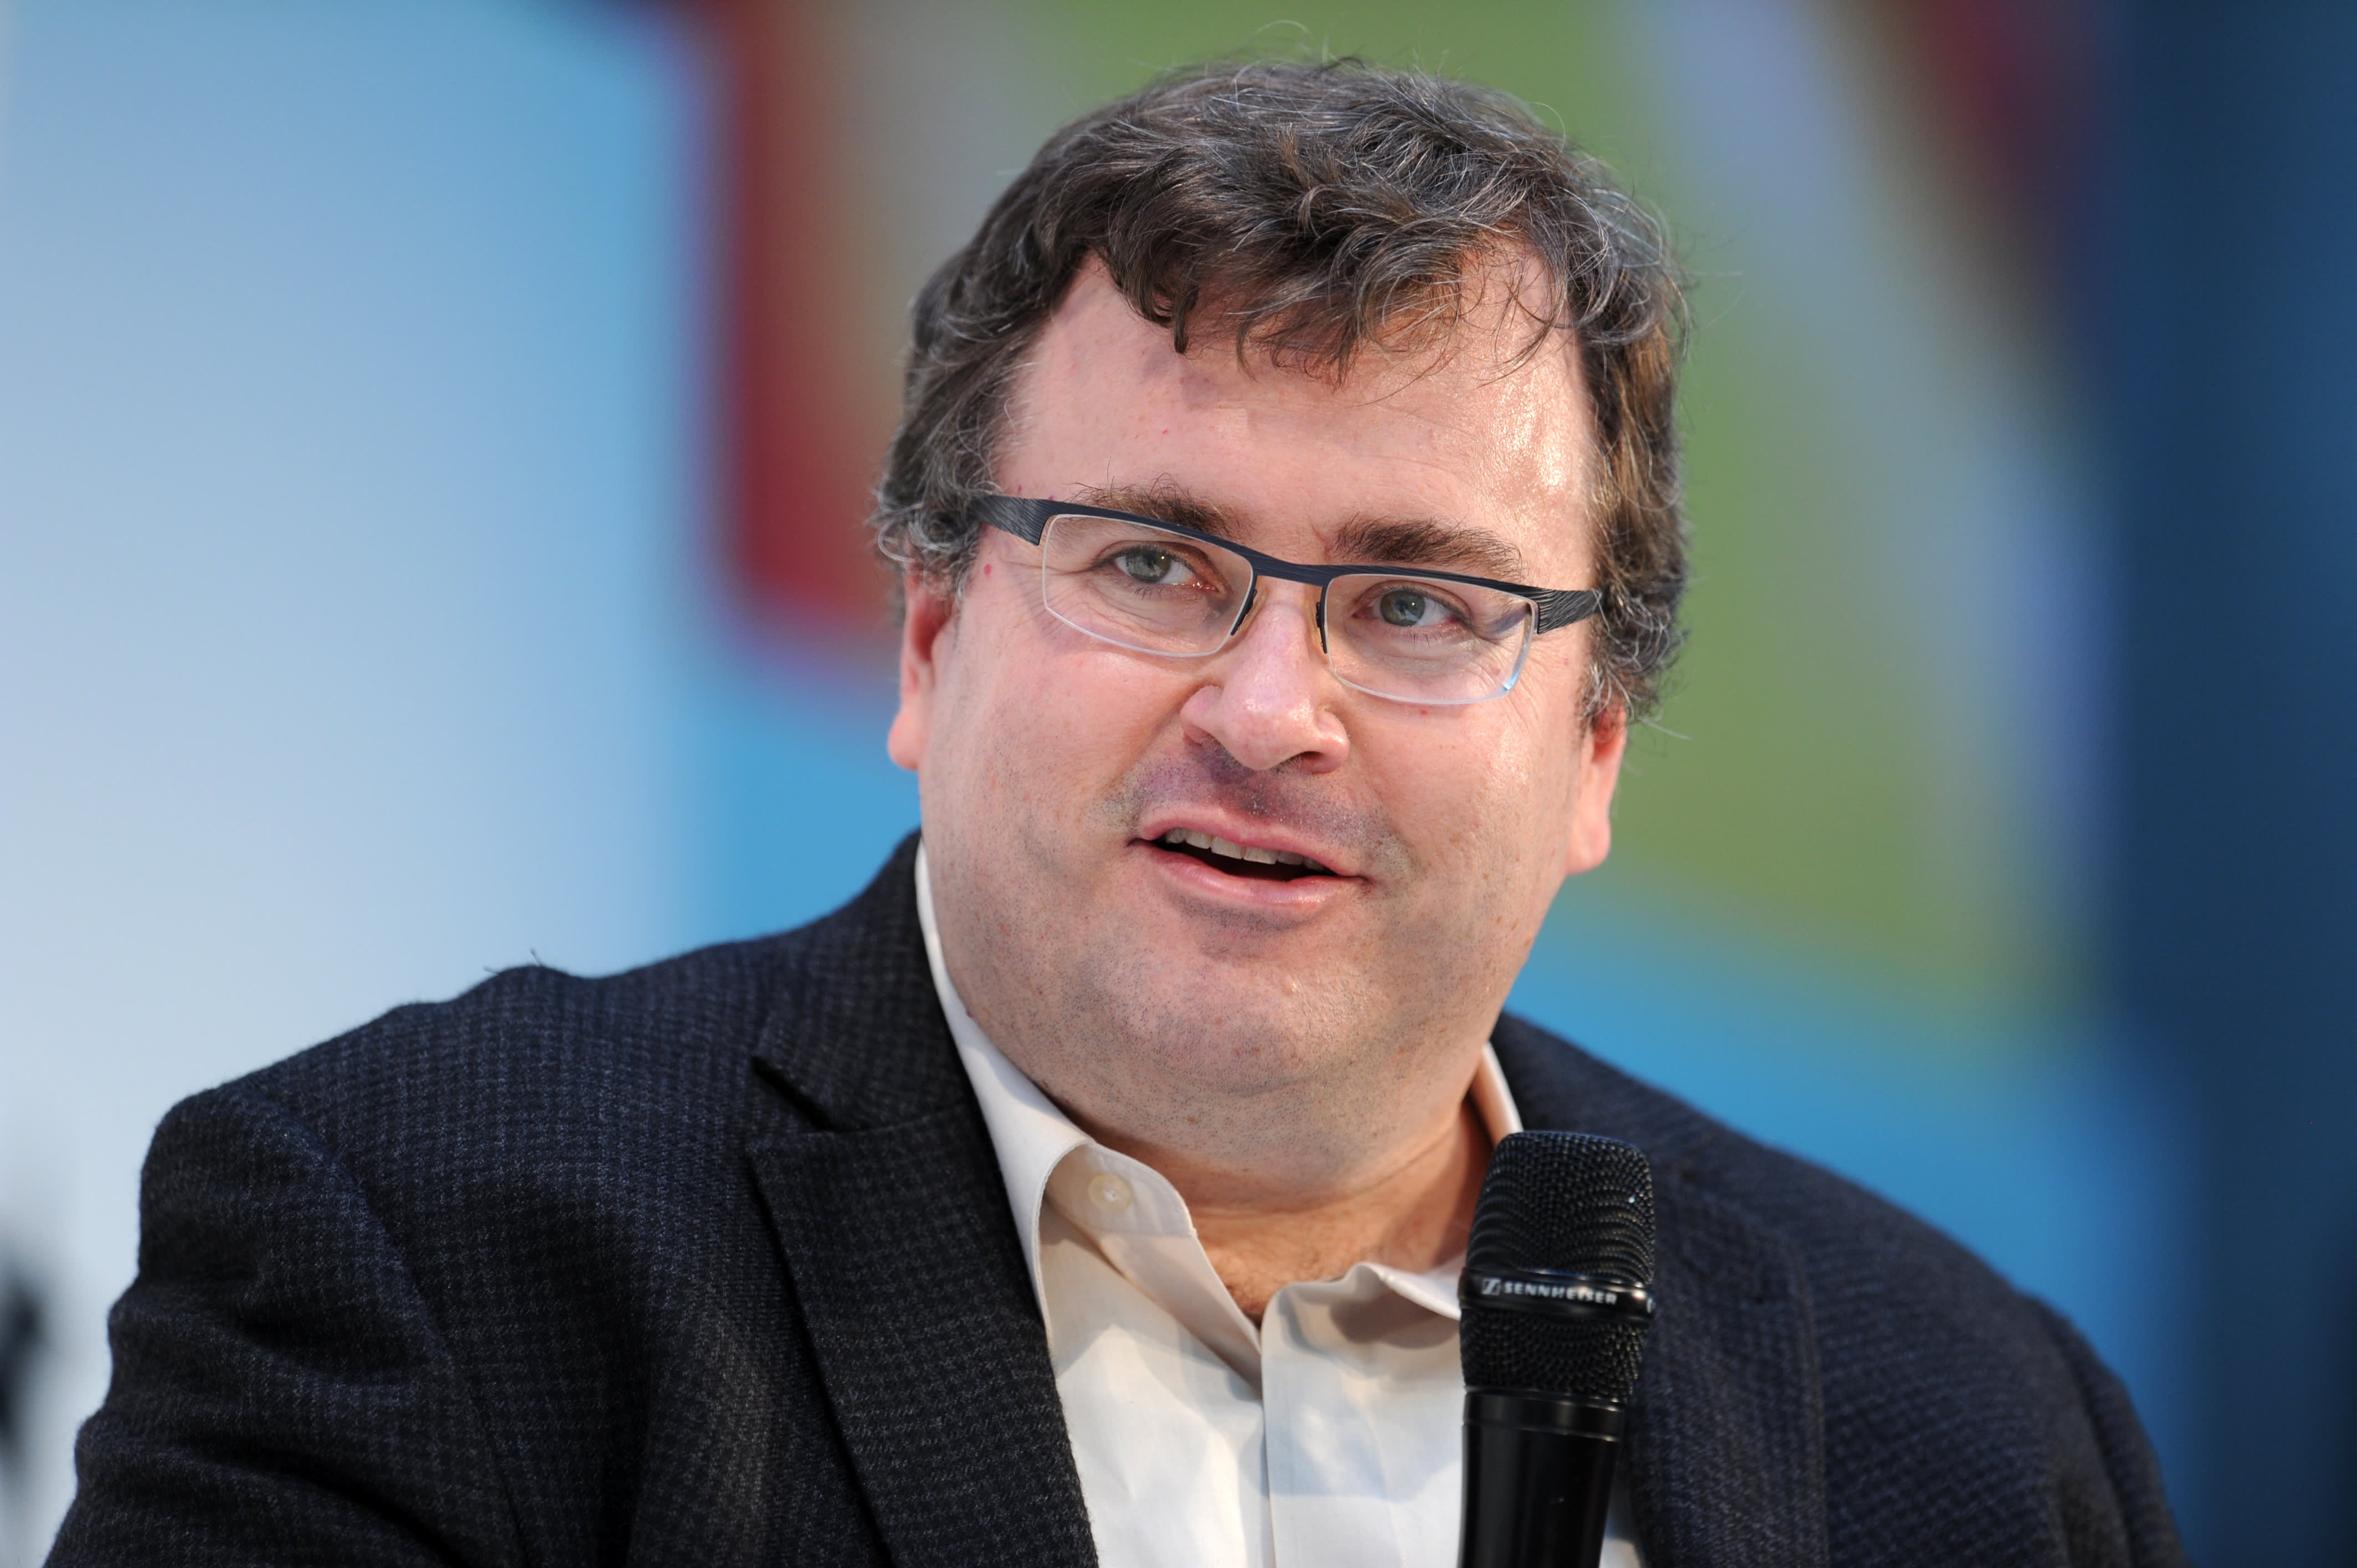 Reid Hoffman has co-founded his first new company since LinkedIn sale